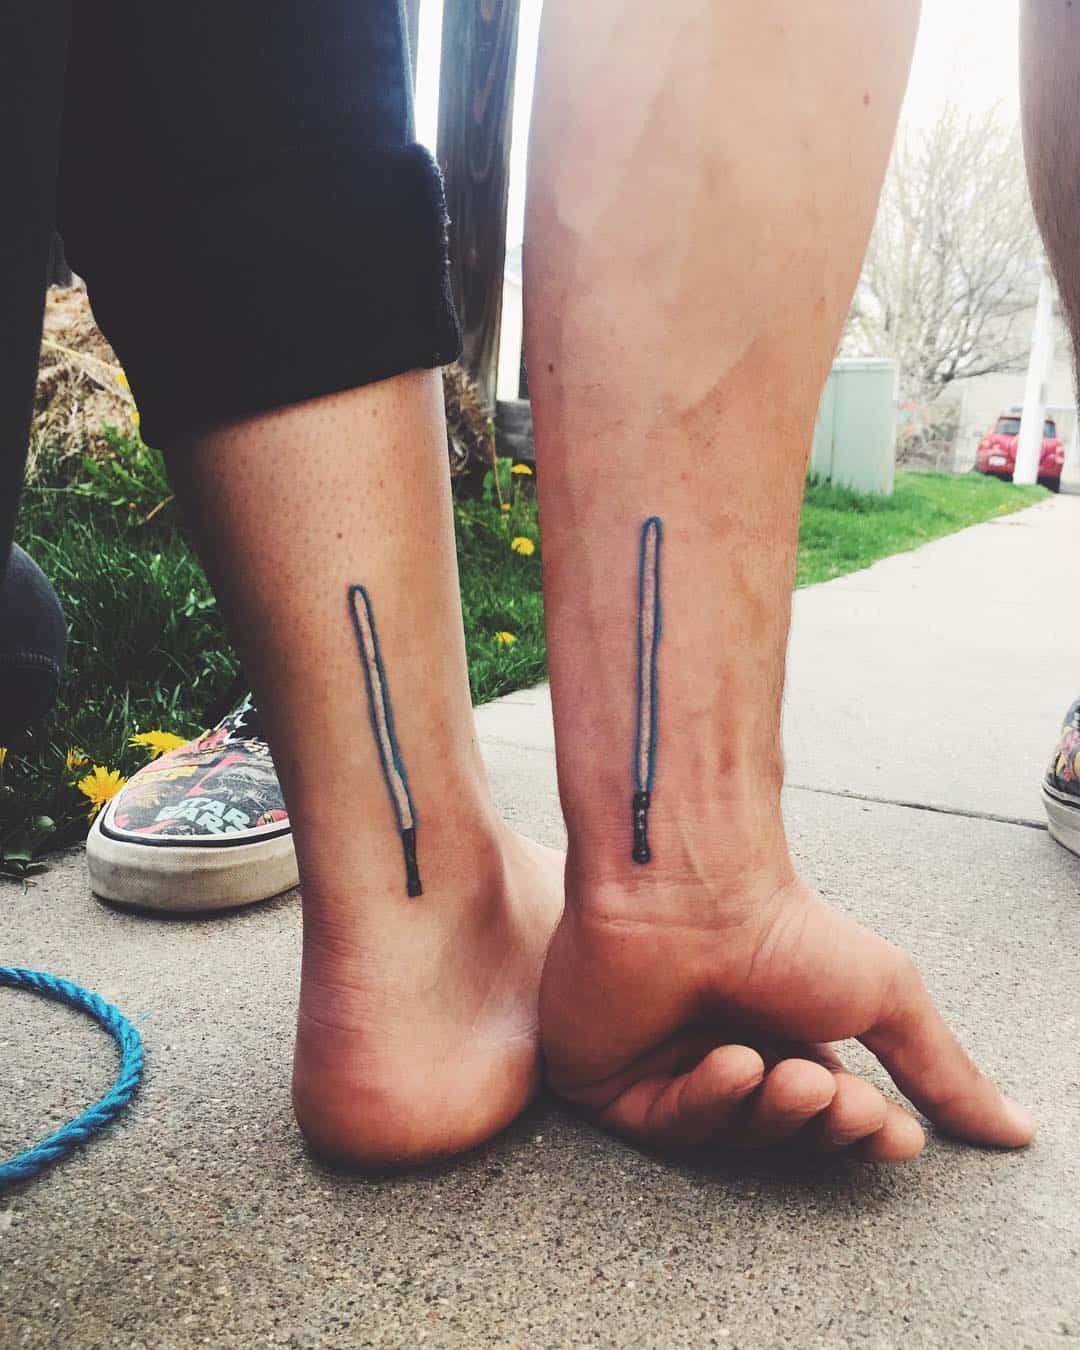 29 Sibling Tattoos To Emphasize This Unbreakable Bond